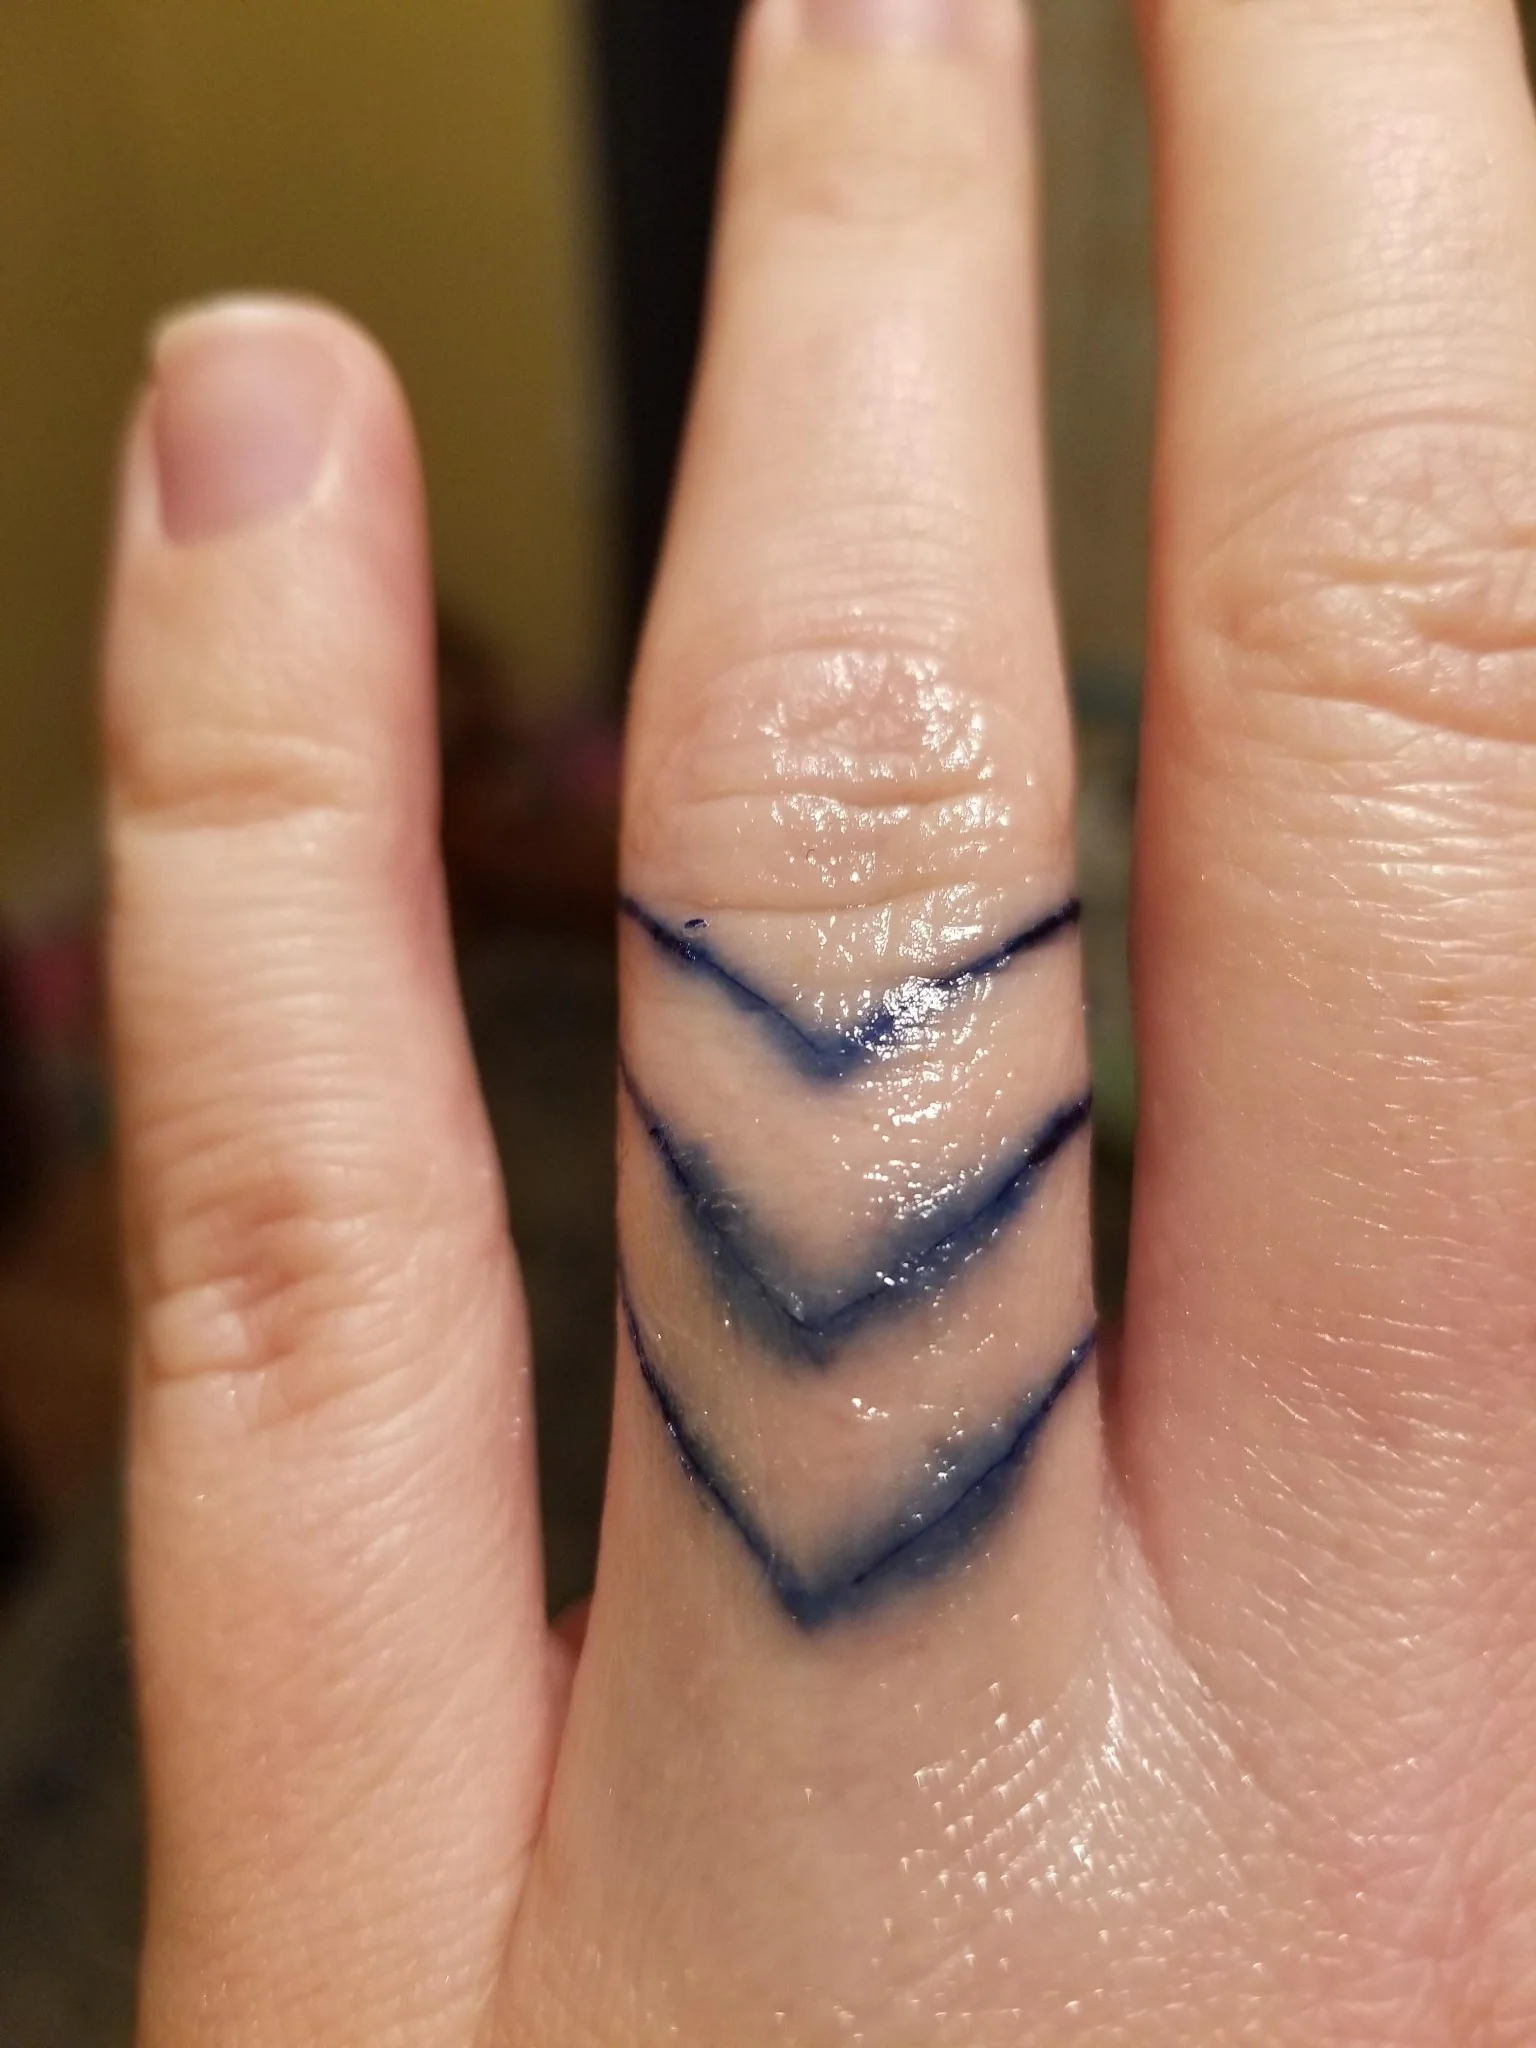 Blowout on a finger tattoo.